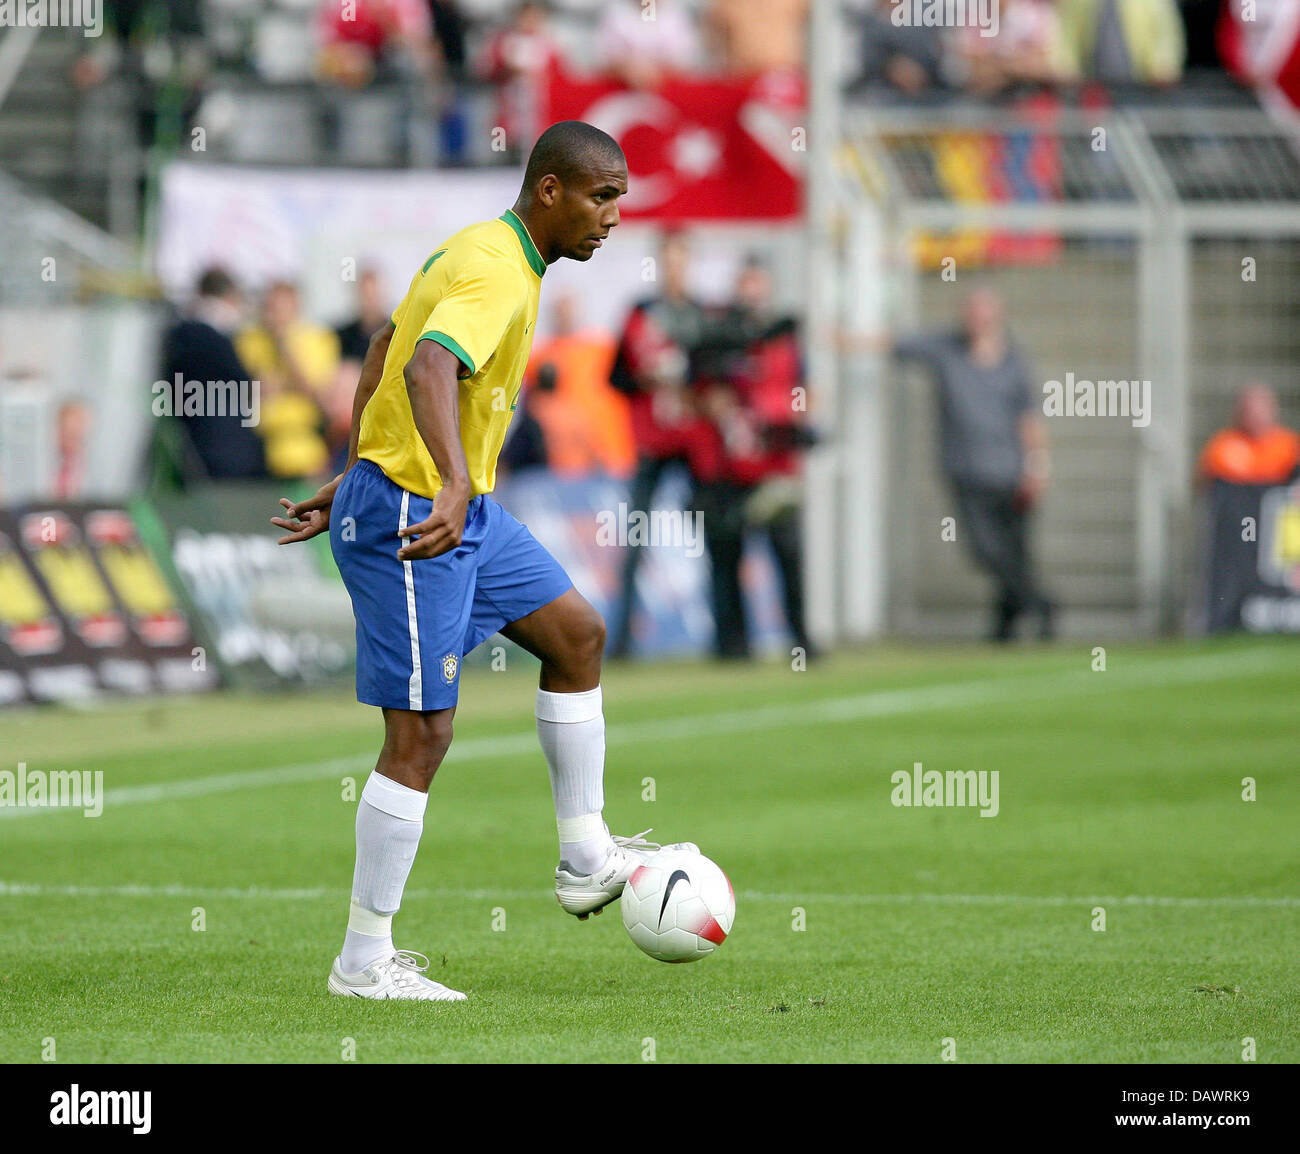 Brazilian international Maicon controls the ball during the friendly Brazil v Turkey at the Signal Iduna Park stadium of Dortmund, Germany, 05 June 2007. The match featured many substitutions and ended in a pleasing but goalless draw. Photo: Achim Scheidemann Stock Photo